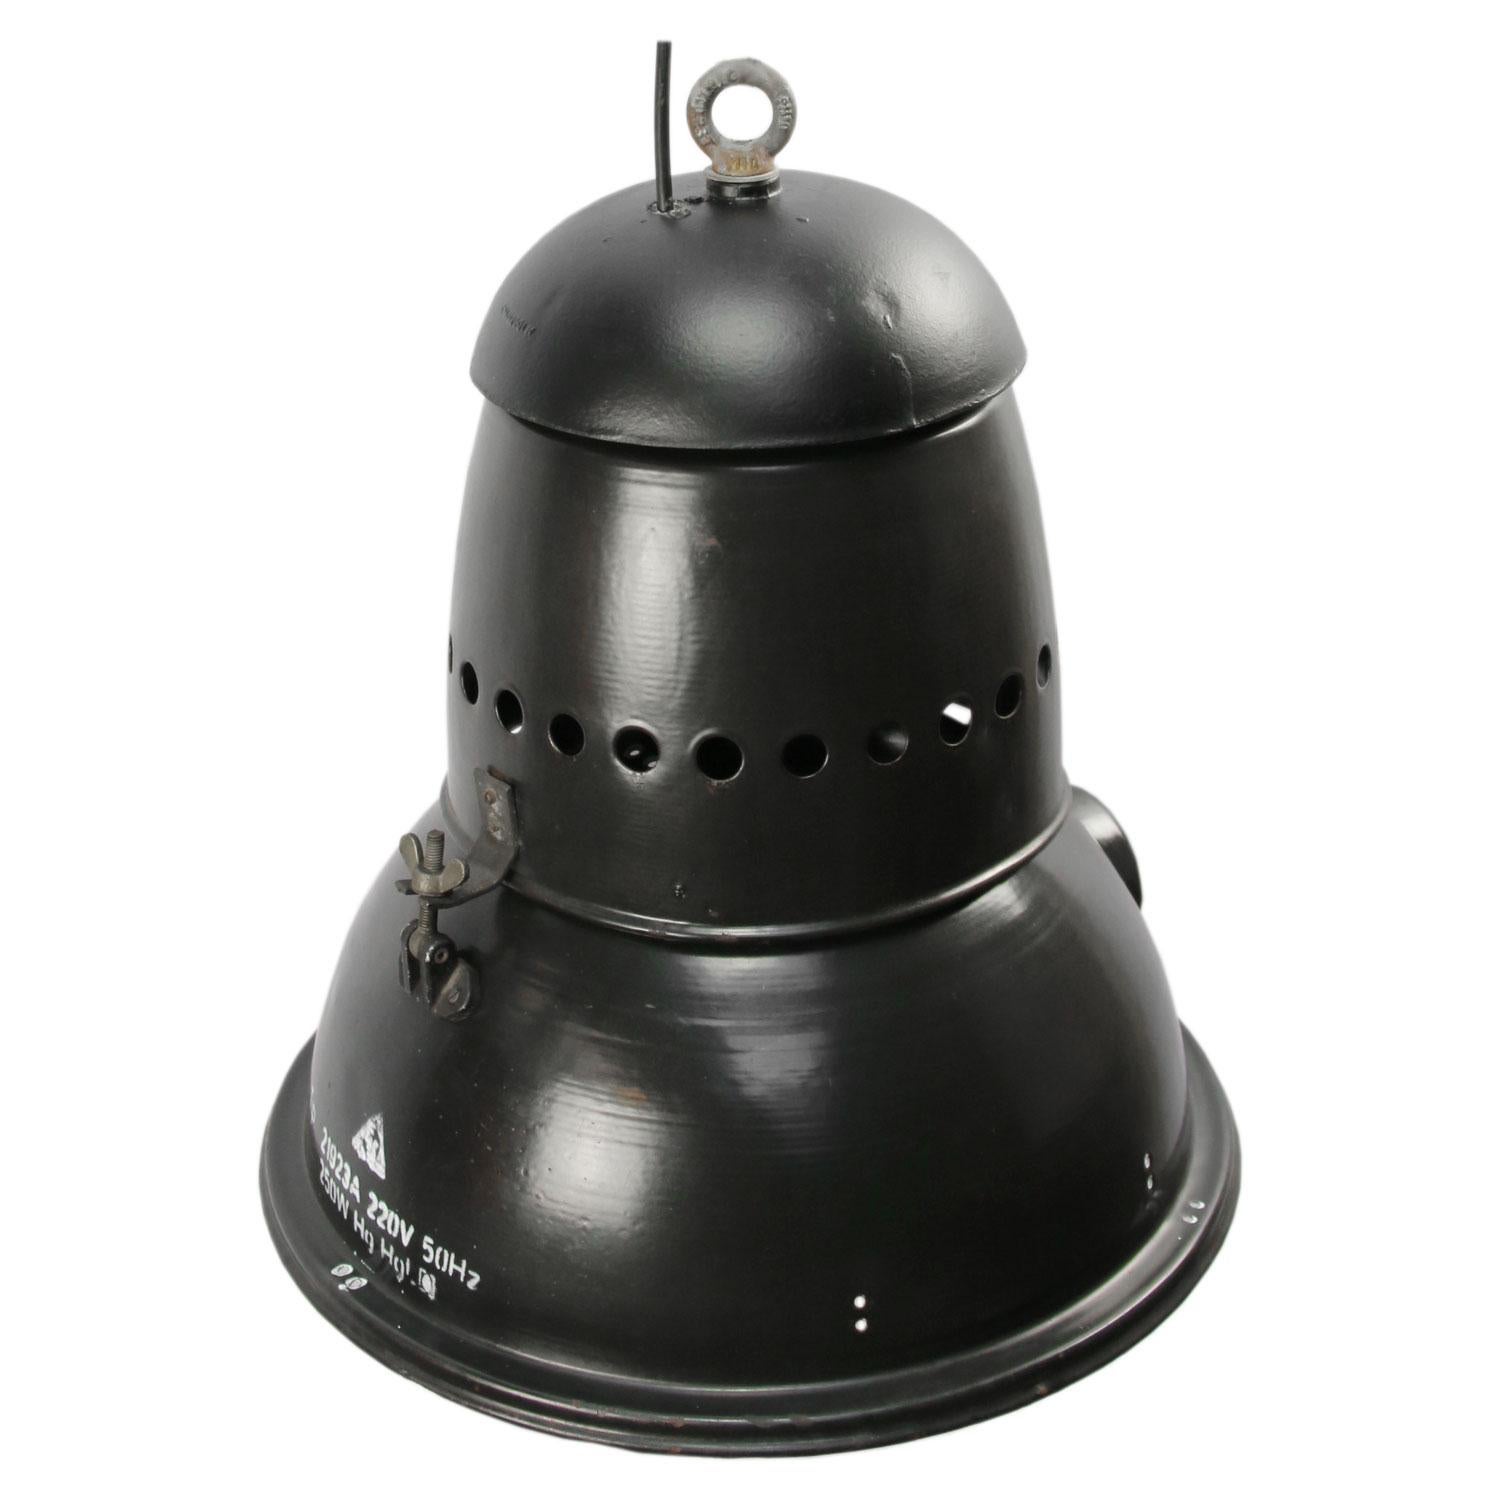 Large black enamel Industrial lamp. White interior cast iron top.

Weight 7.5 kg / 16.5 lb

Priced per individual item. All lamps have been made suitable by international standards for incandescent light bulbs, energy-efficient and LED bulbs.